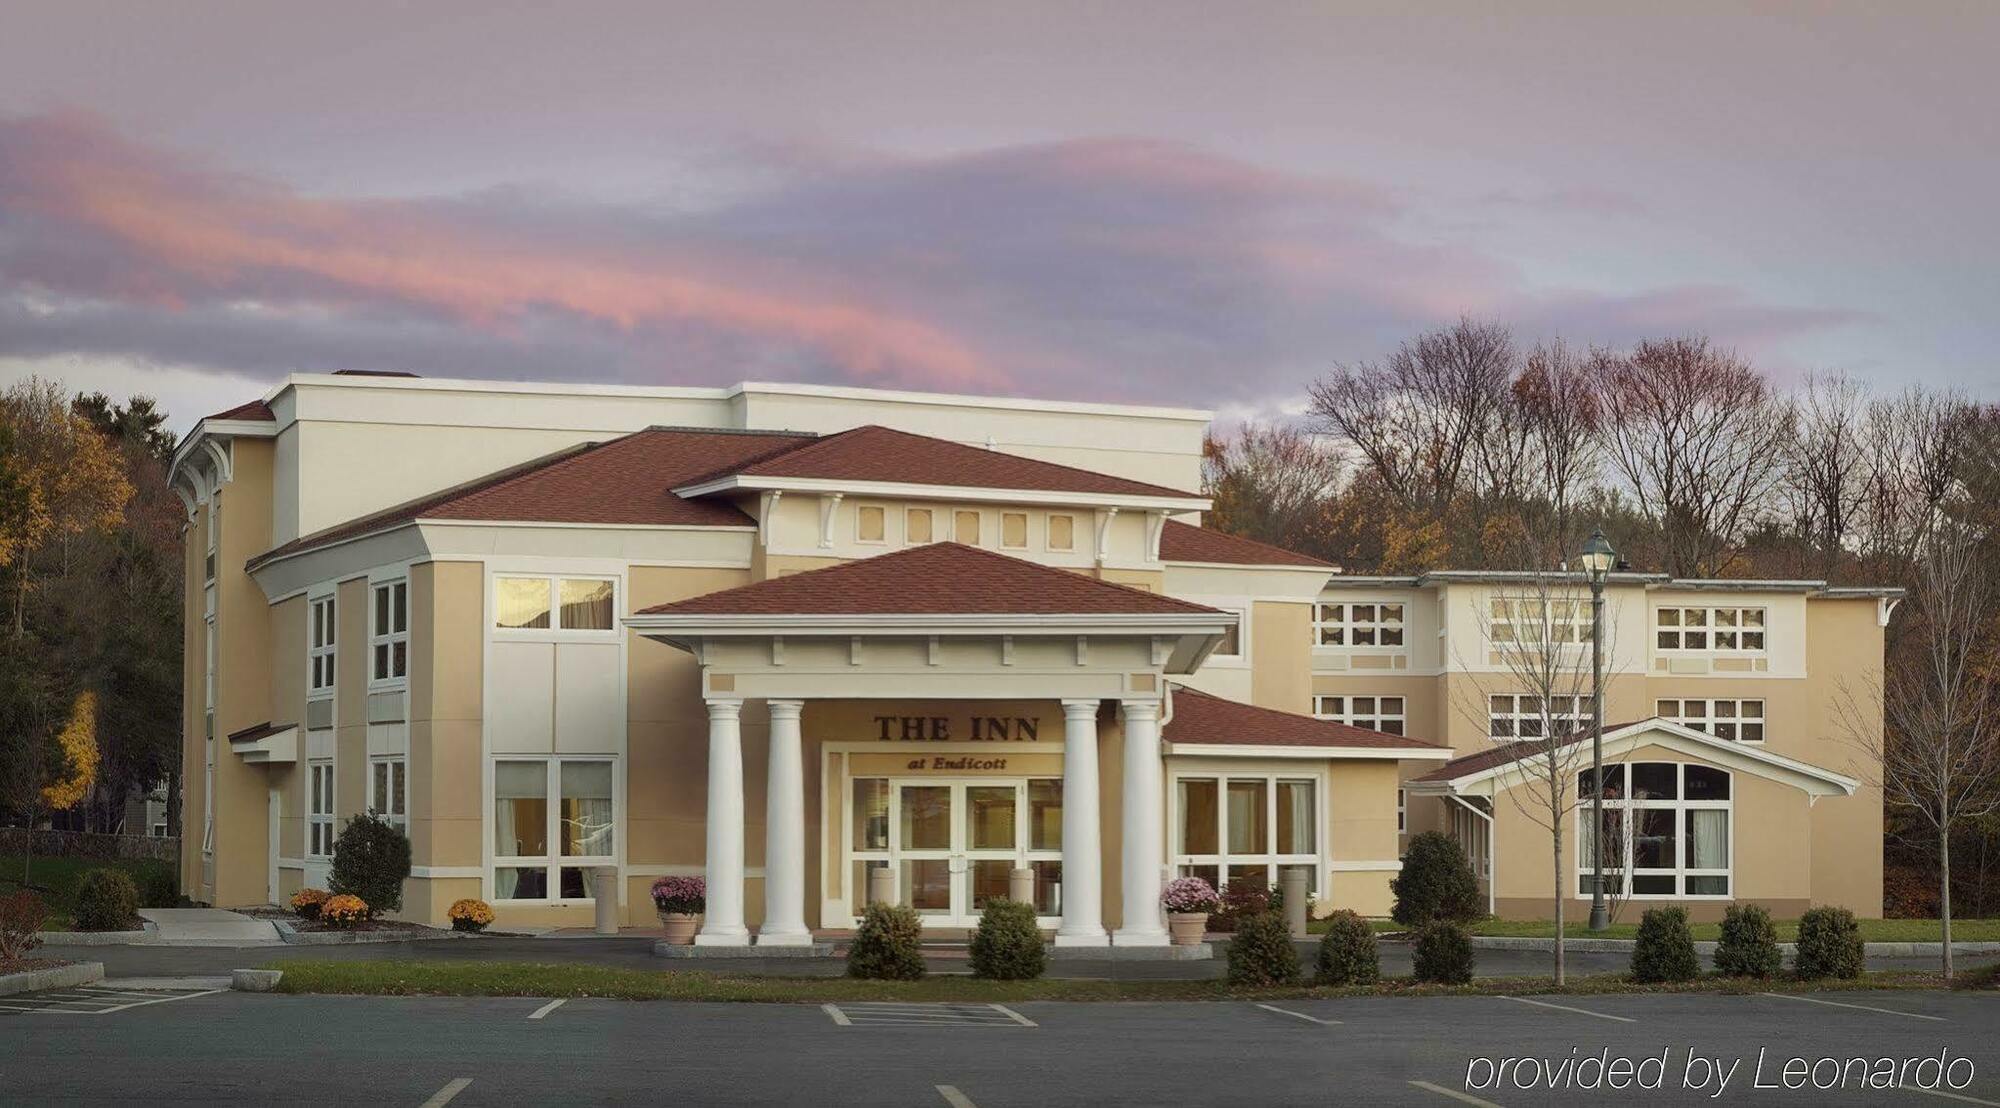 The Wylie Inn And Conference Center At Endicott College Beverly Dış mekan fotoğraf